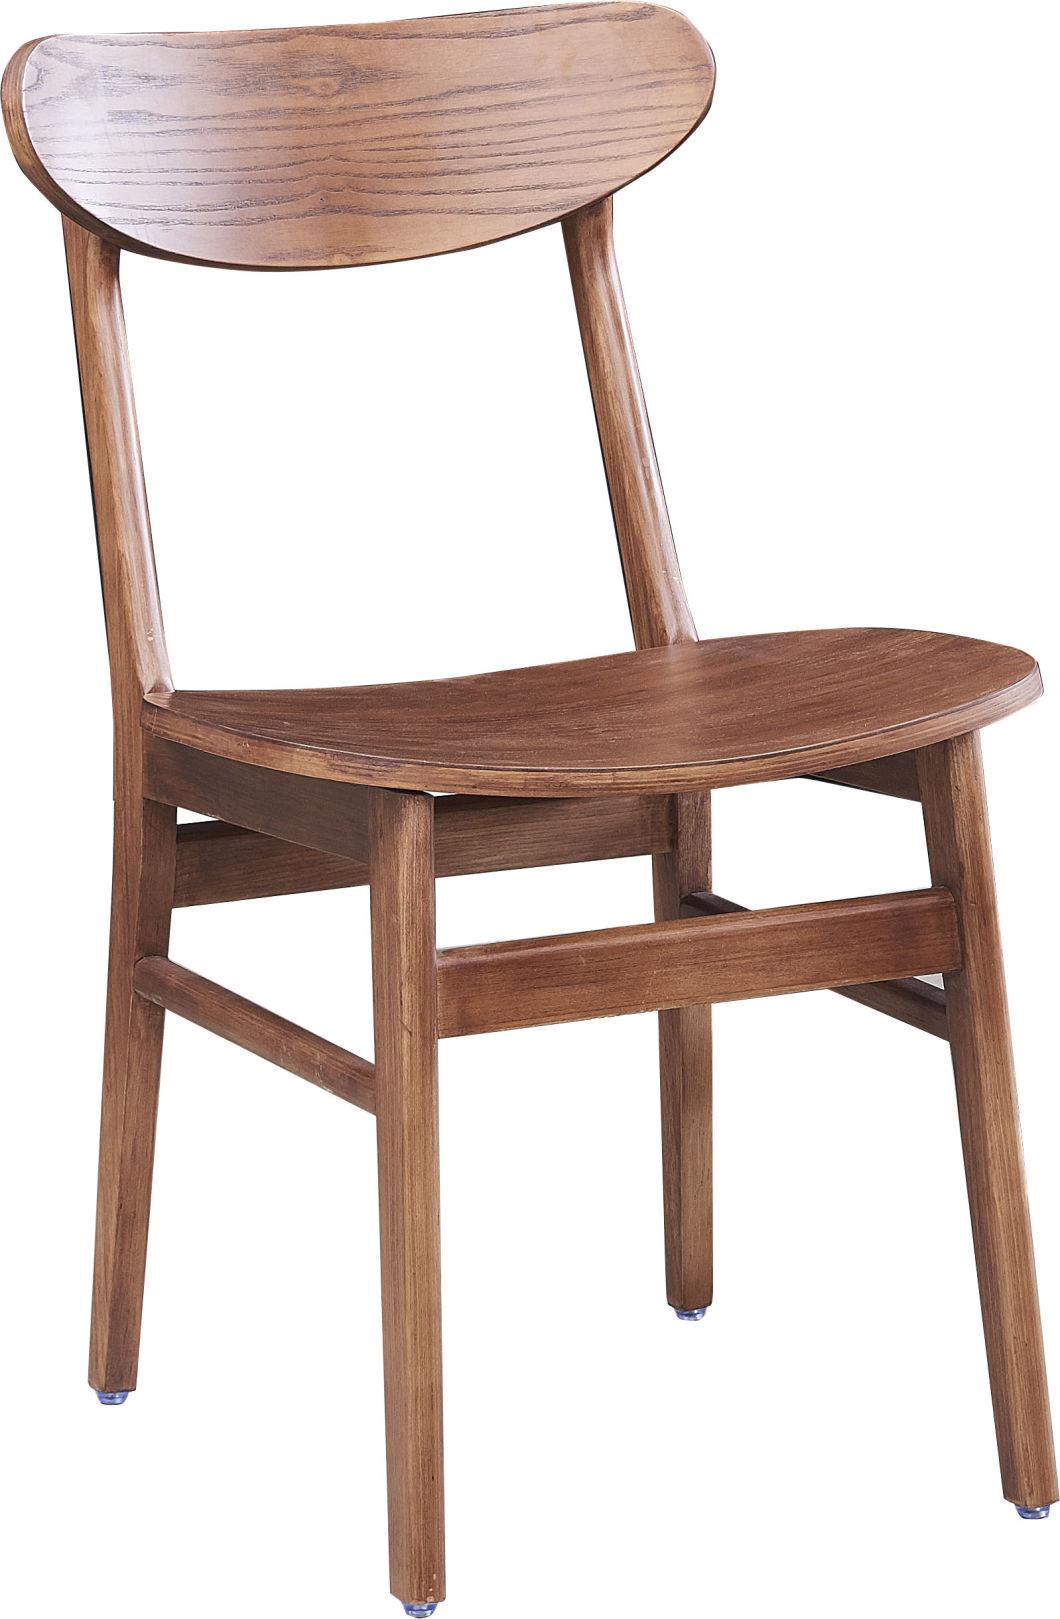 by-1603 Dining Chair/Solid Wood Frame/Dining Set in Home and Hotel